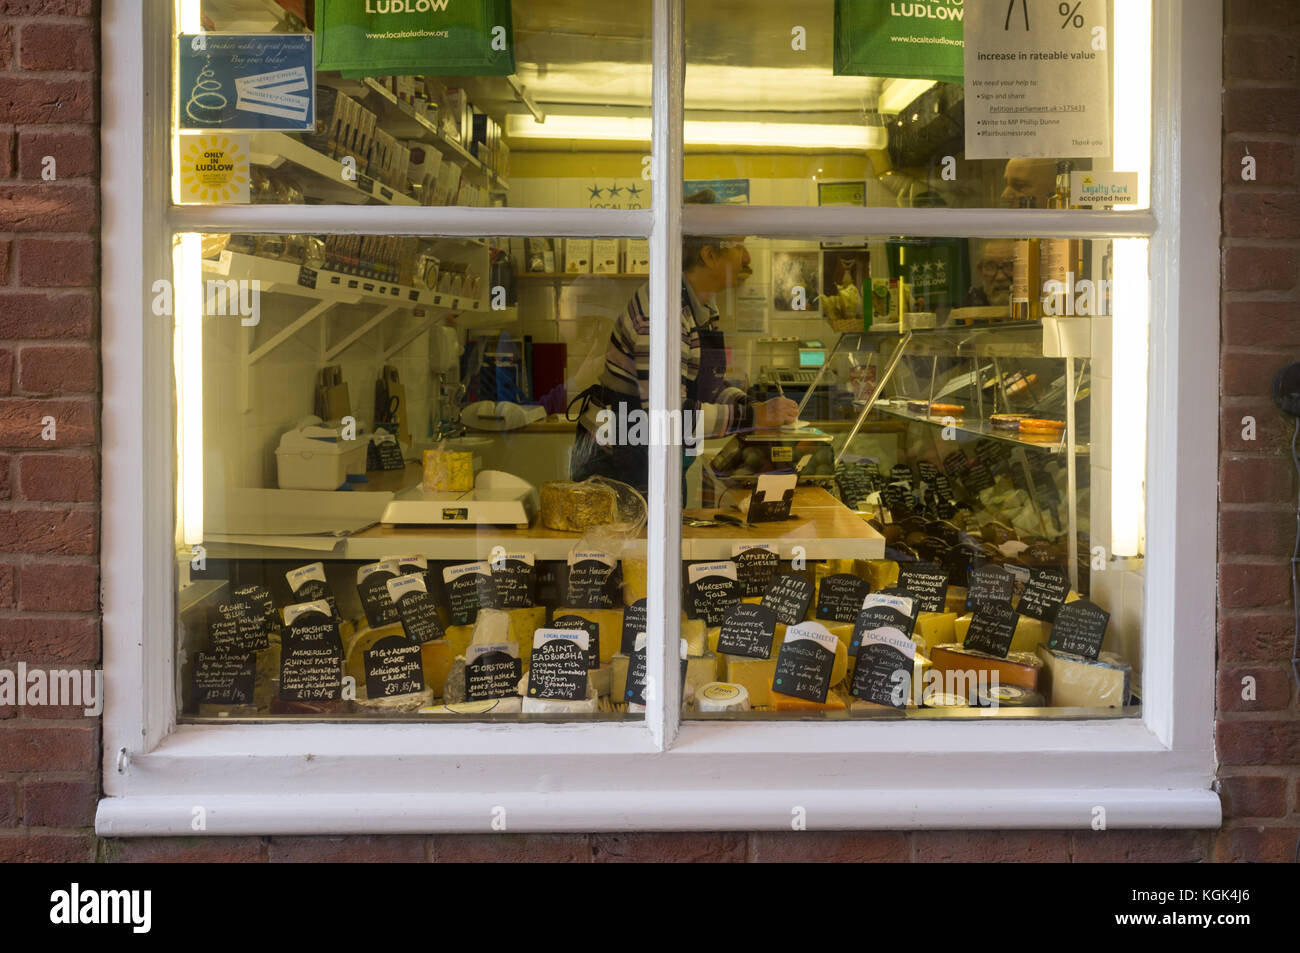 Outside view of a cheese shop in Ludlow, Shropshire UK Stock Photo